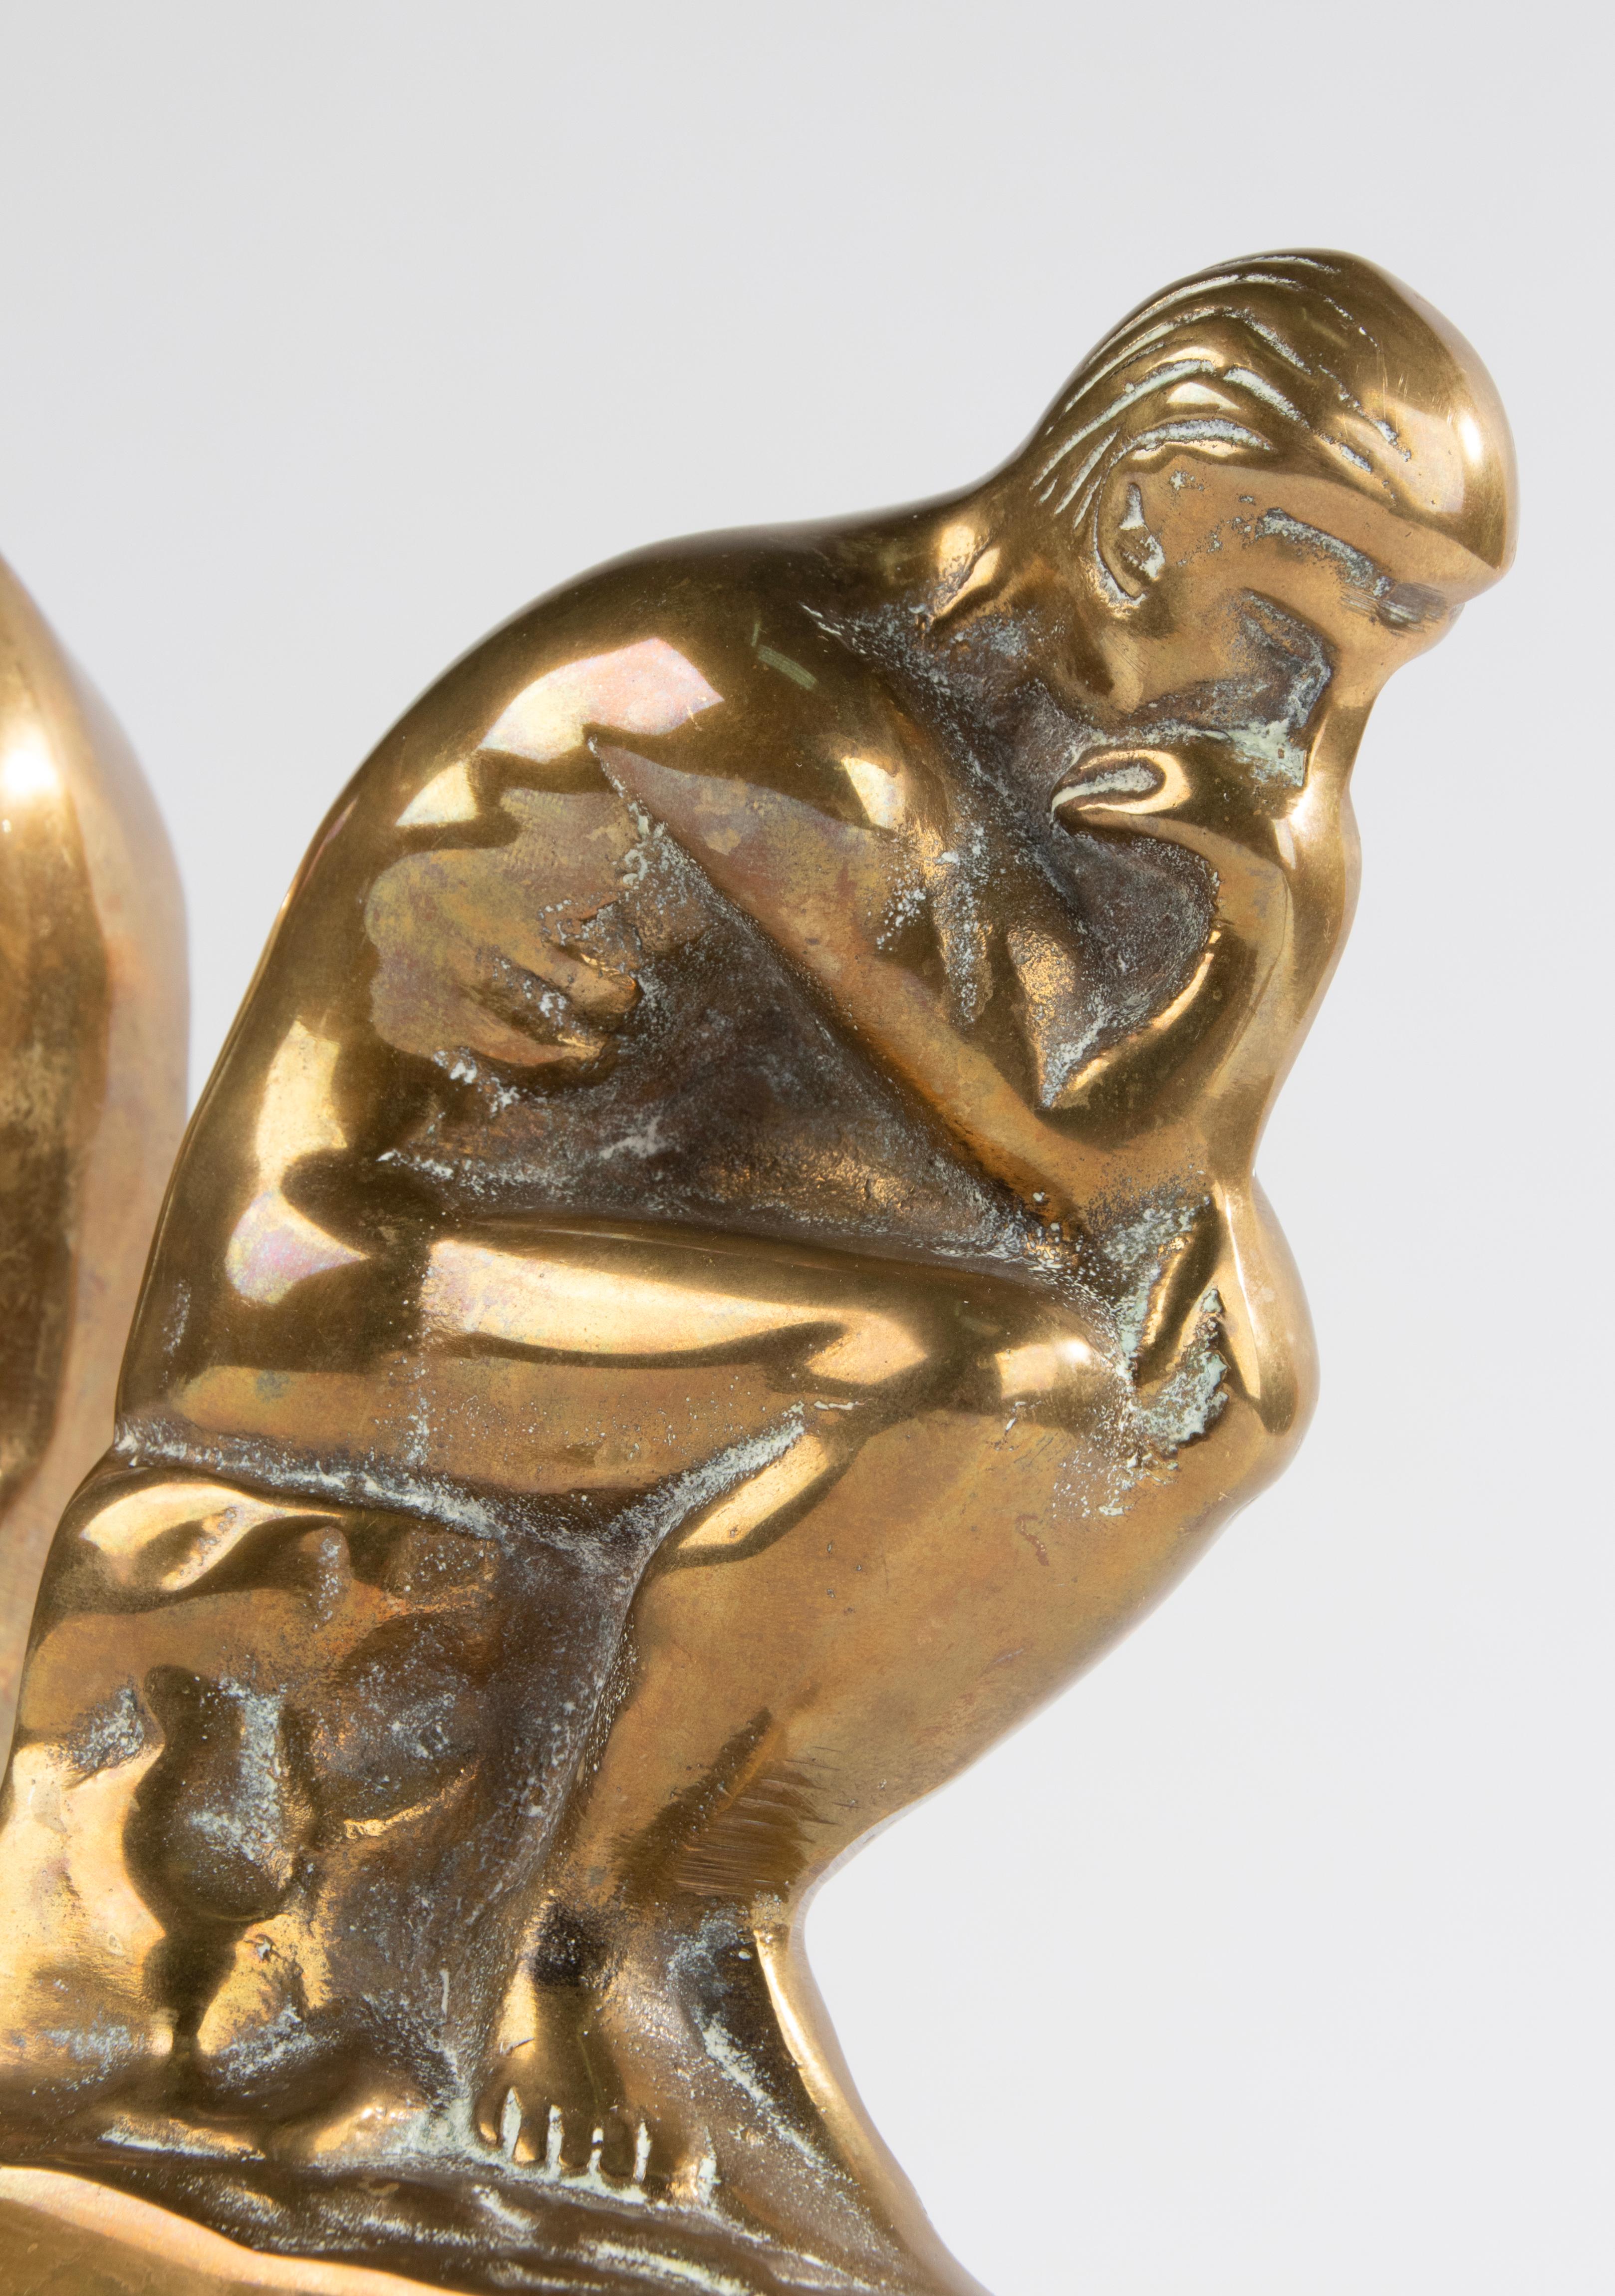 Mid-20th Century Brass Bookends Inspired by 'the Thinker' from Auguste Rodin For Sale 2